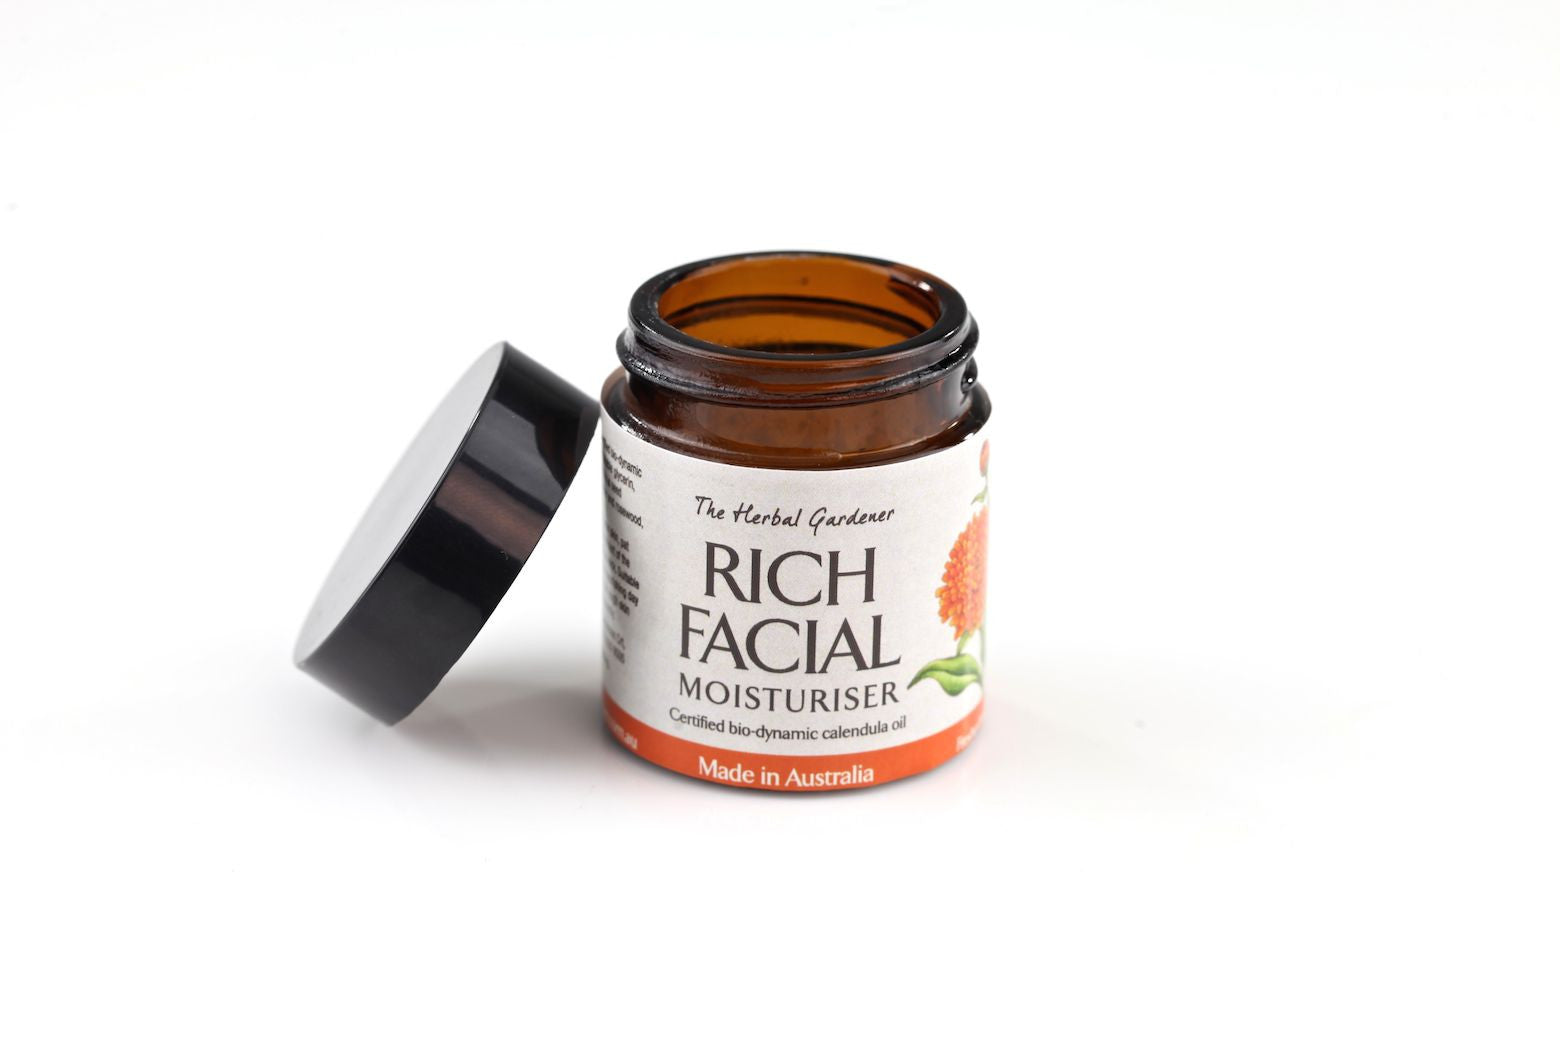 100% natural rich moisturising skin cream for your face. Our facial moisturizer treatment helps smooth fine lines and reduce the signs of ageing. Our skin care products are suitable for sensitive skin. Grown and made on the Gold Coast, QLD Australia.